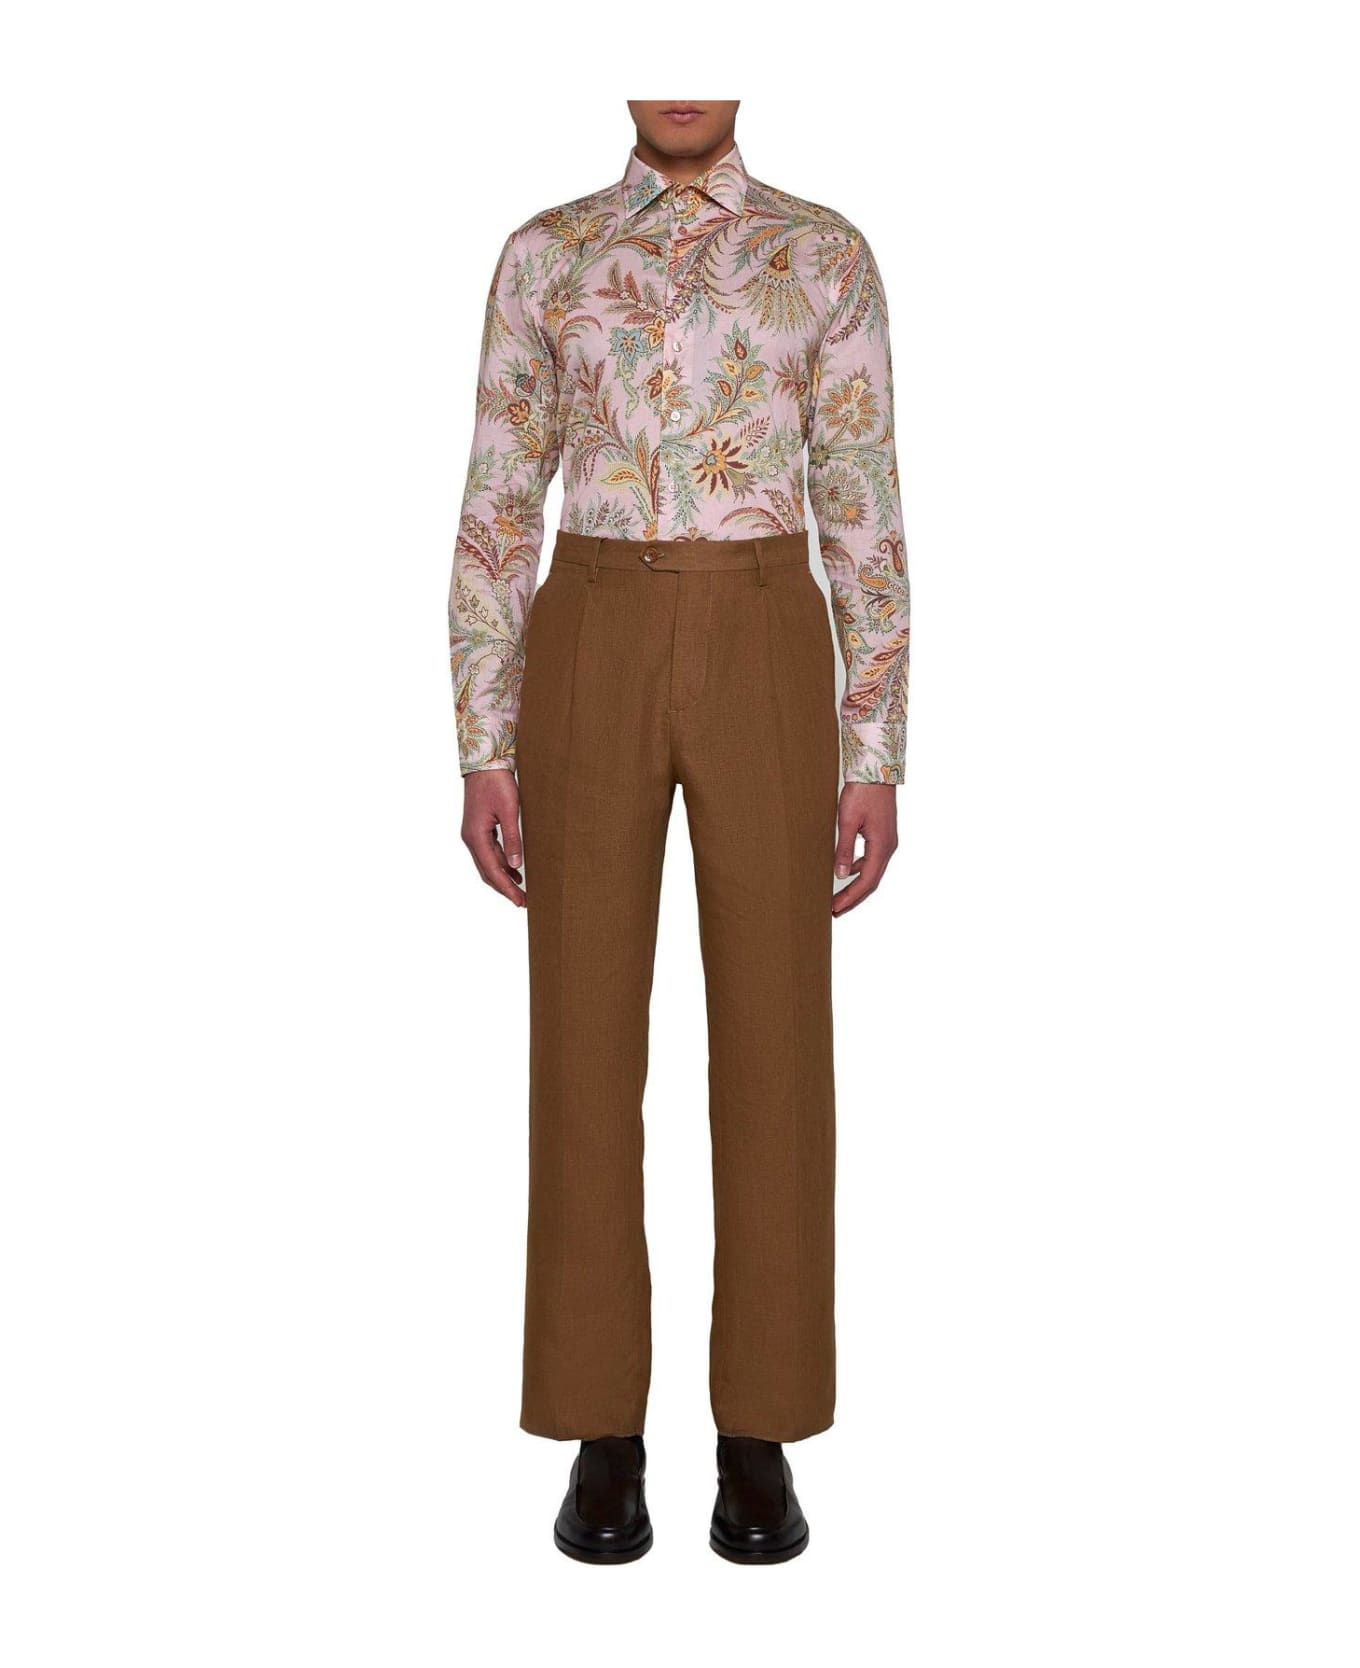 Etro Floral Printed Long-sleeved Shirt - Stampa f.do rosa シャツ